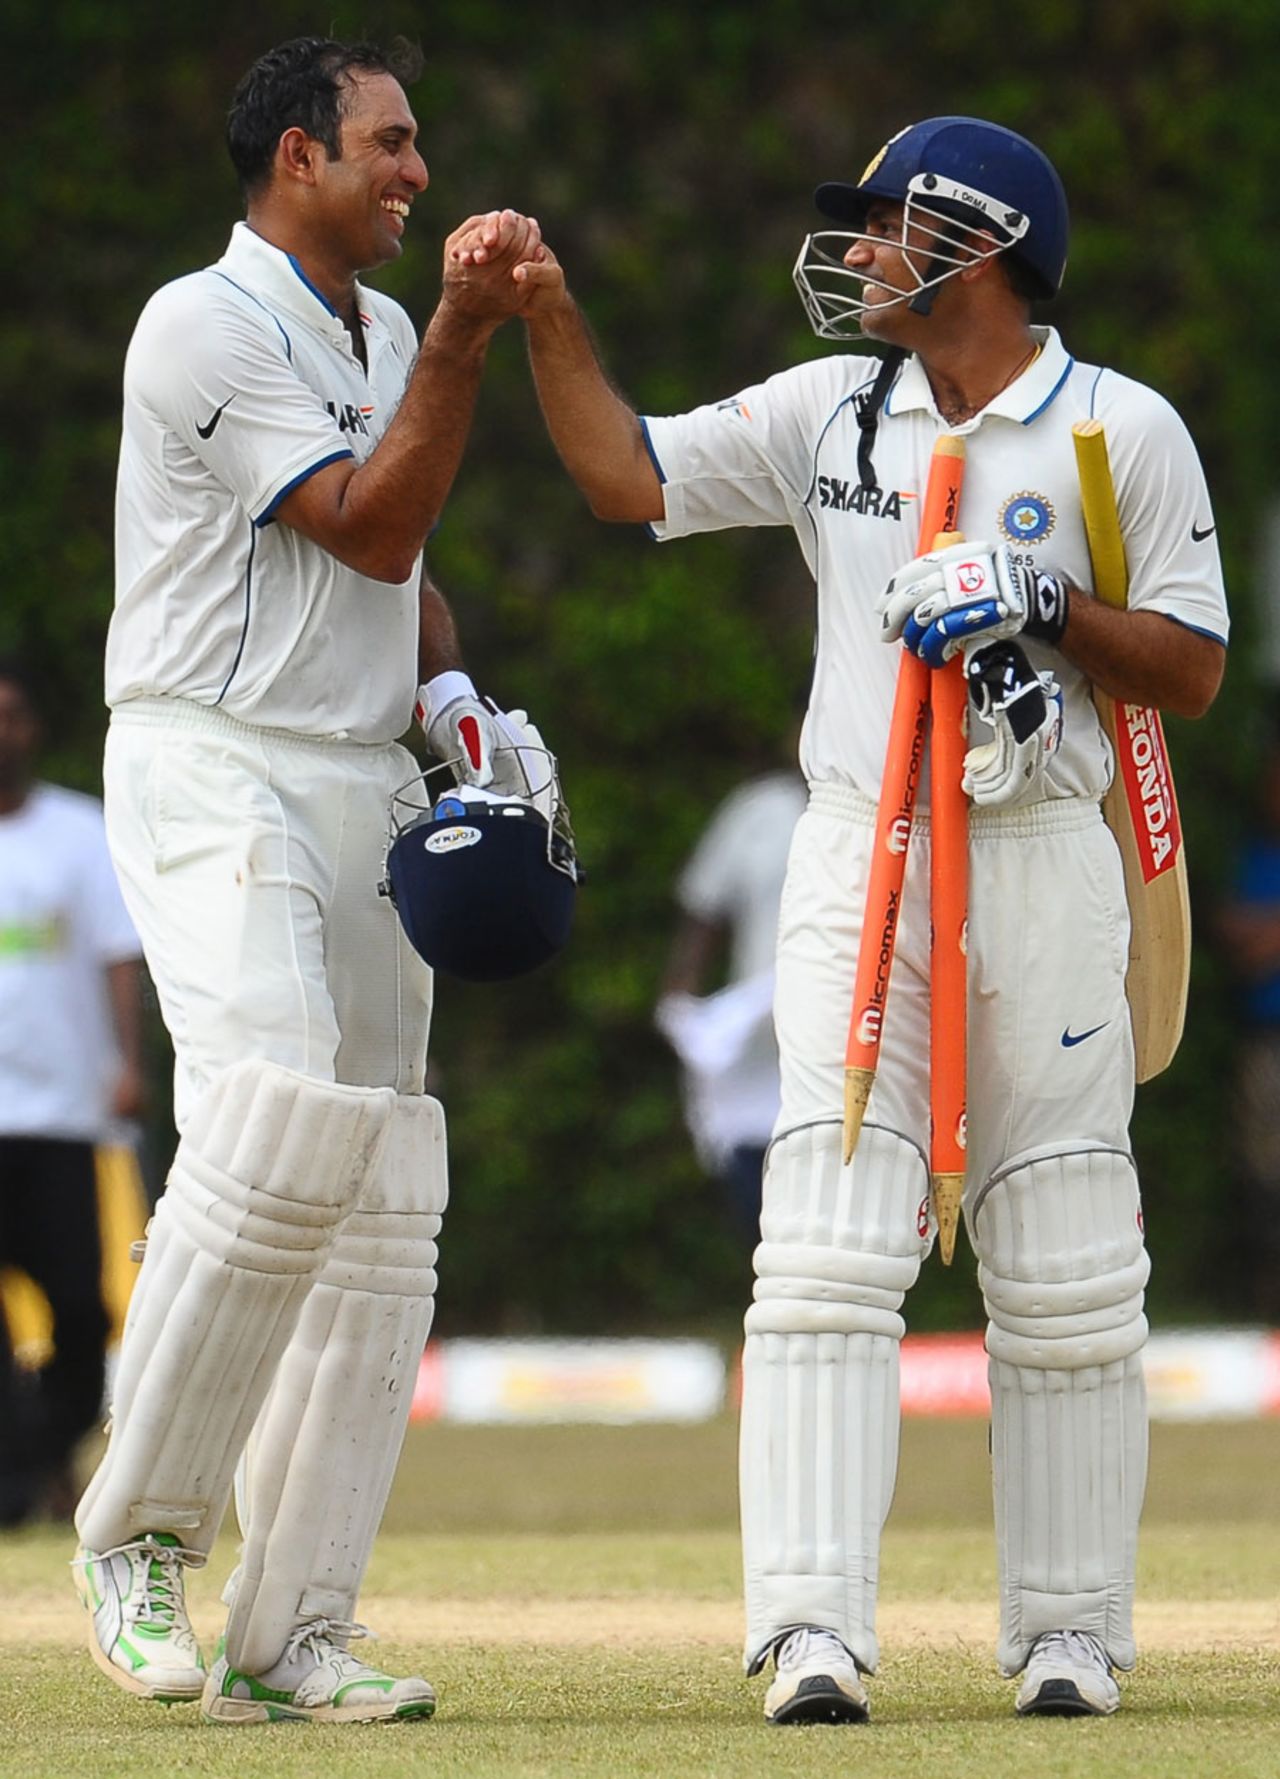 VVS Laxman and Virender Sehwag celebrate India's victory, Sri Lanka v India, 3rd Test, P Sara Oval, 5th day, August 7, 2010